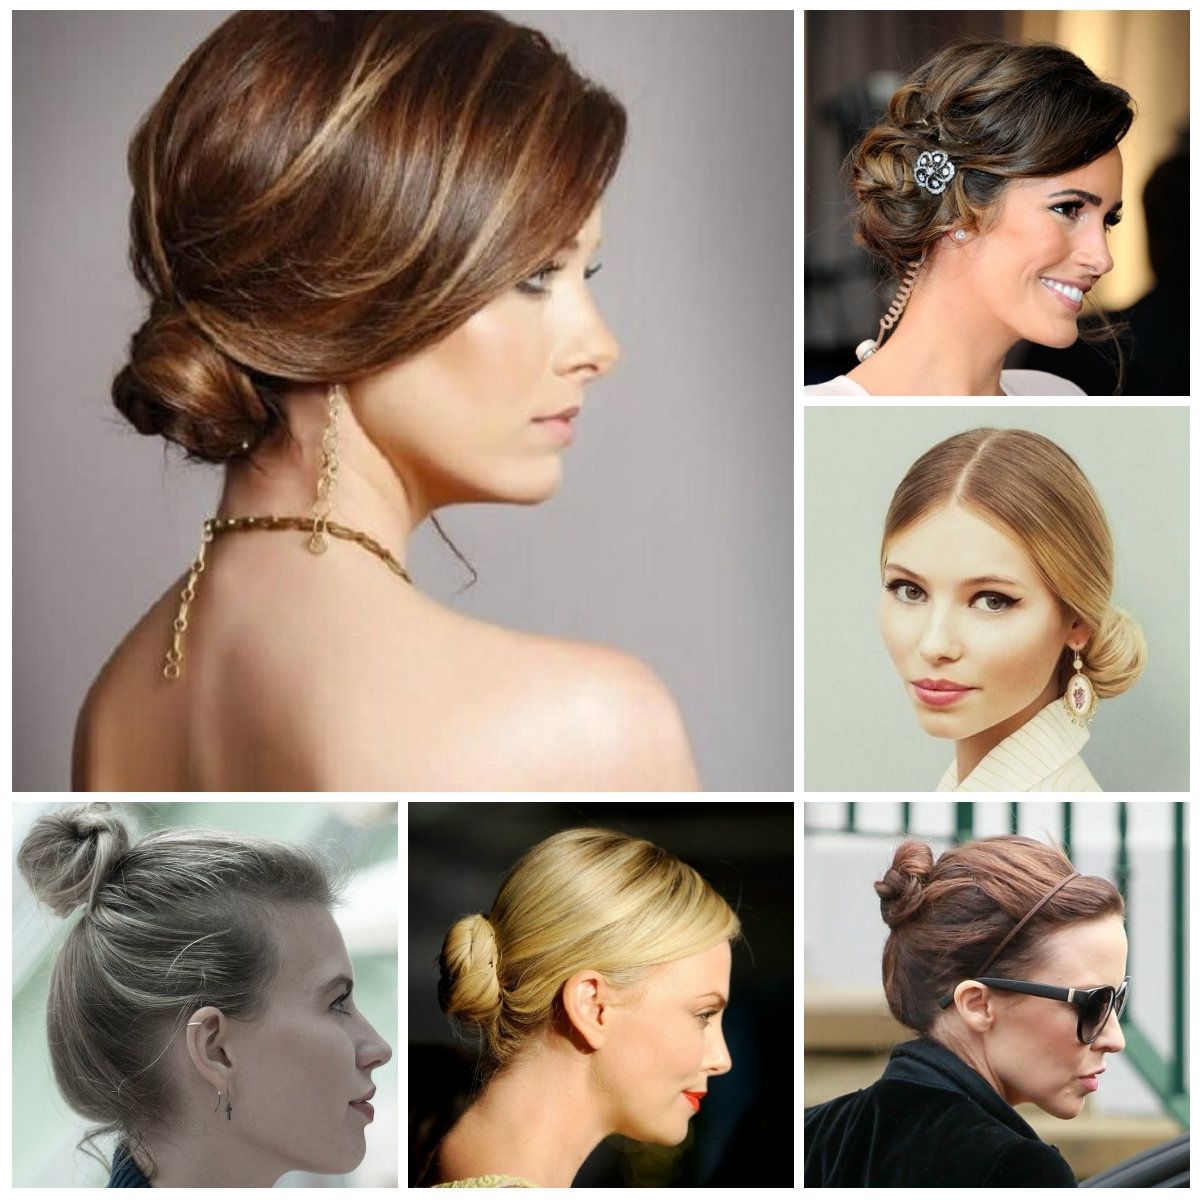 Simple Updo Hairstyles For Short Hair 66 Inspiration With Updo Throughout Short Hair Updo Hairstyles (View 14 of 15)